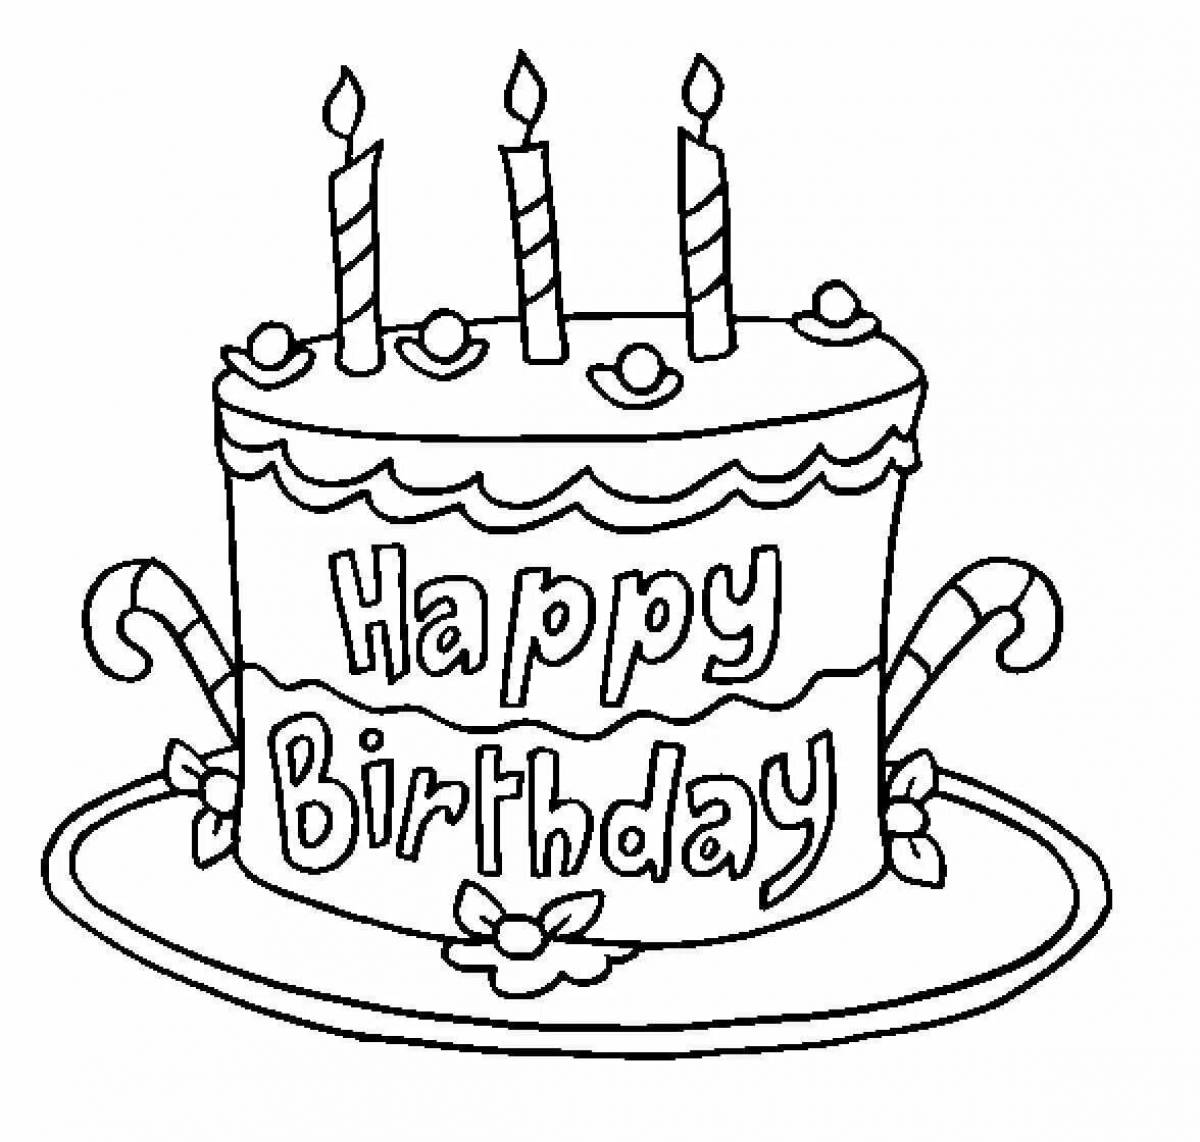 Sparkly happy birthday sister coloring page